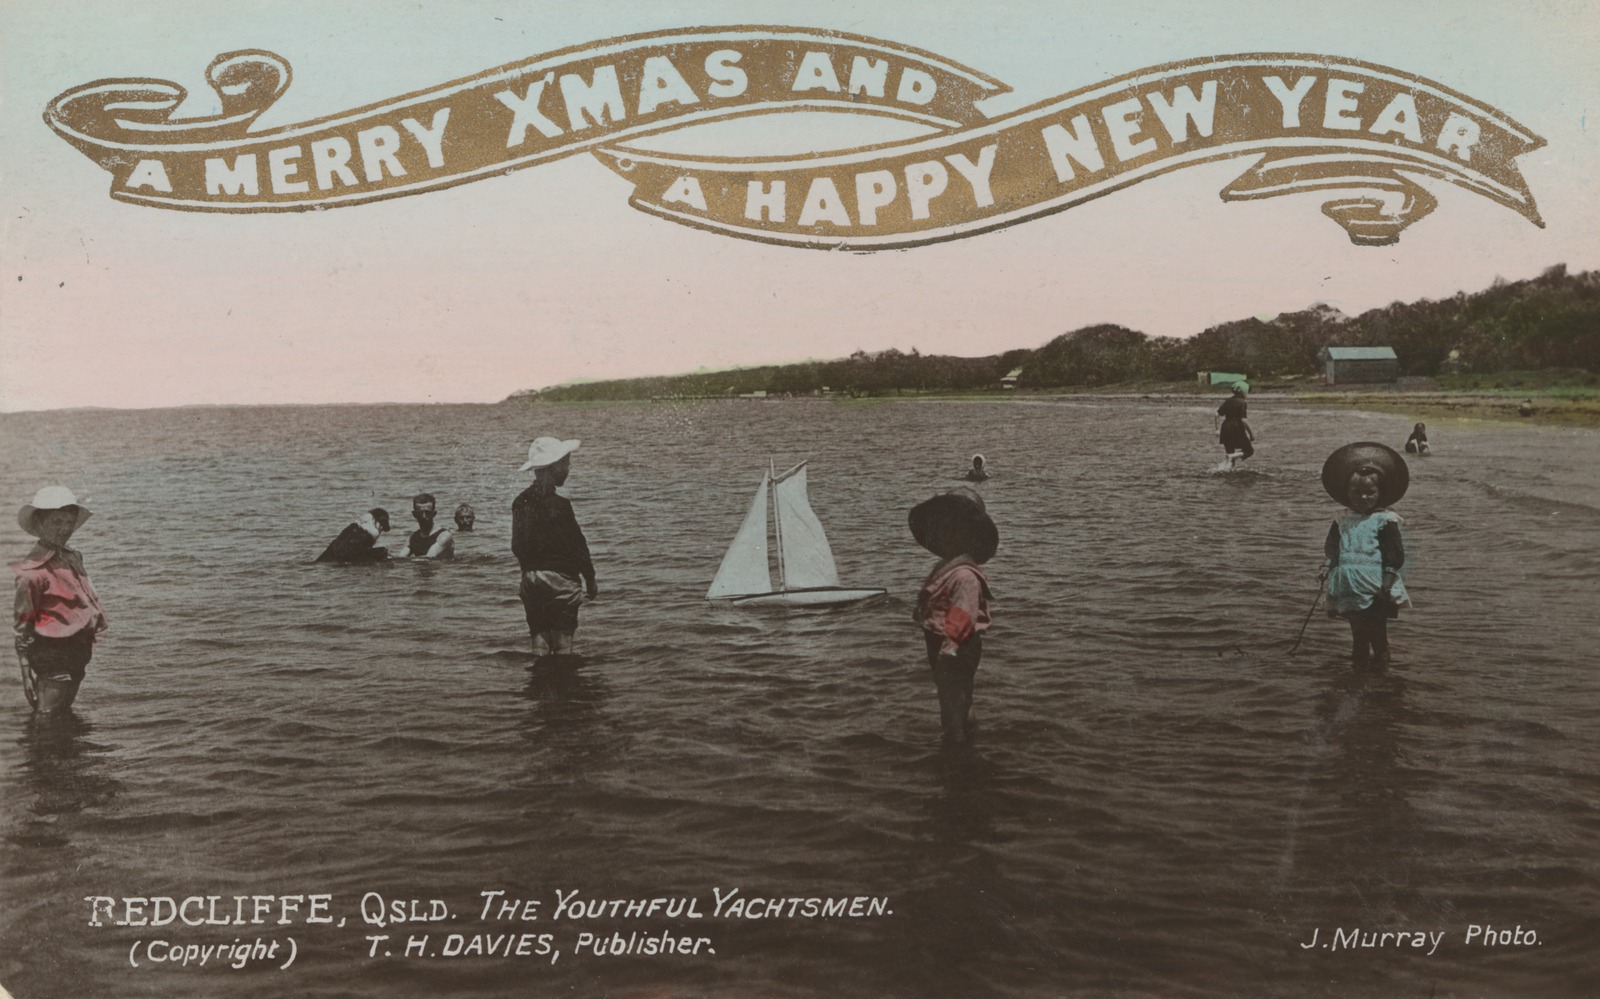 Christmas greeting card featuring Sutton's Beach, Redcliffe